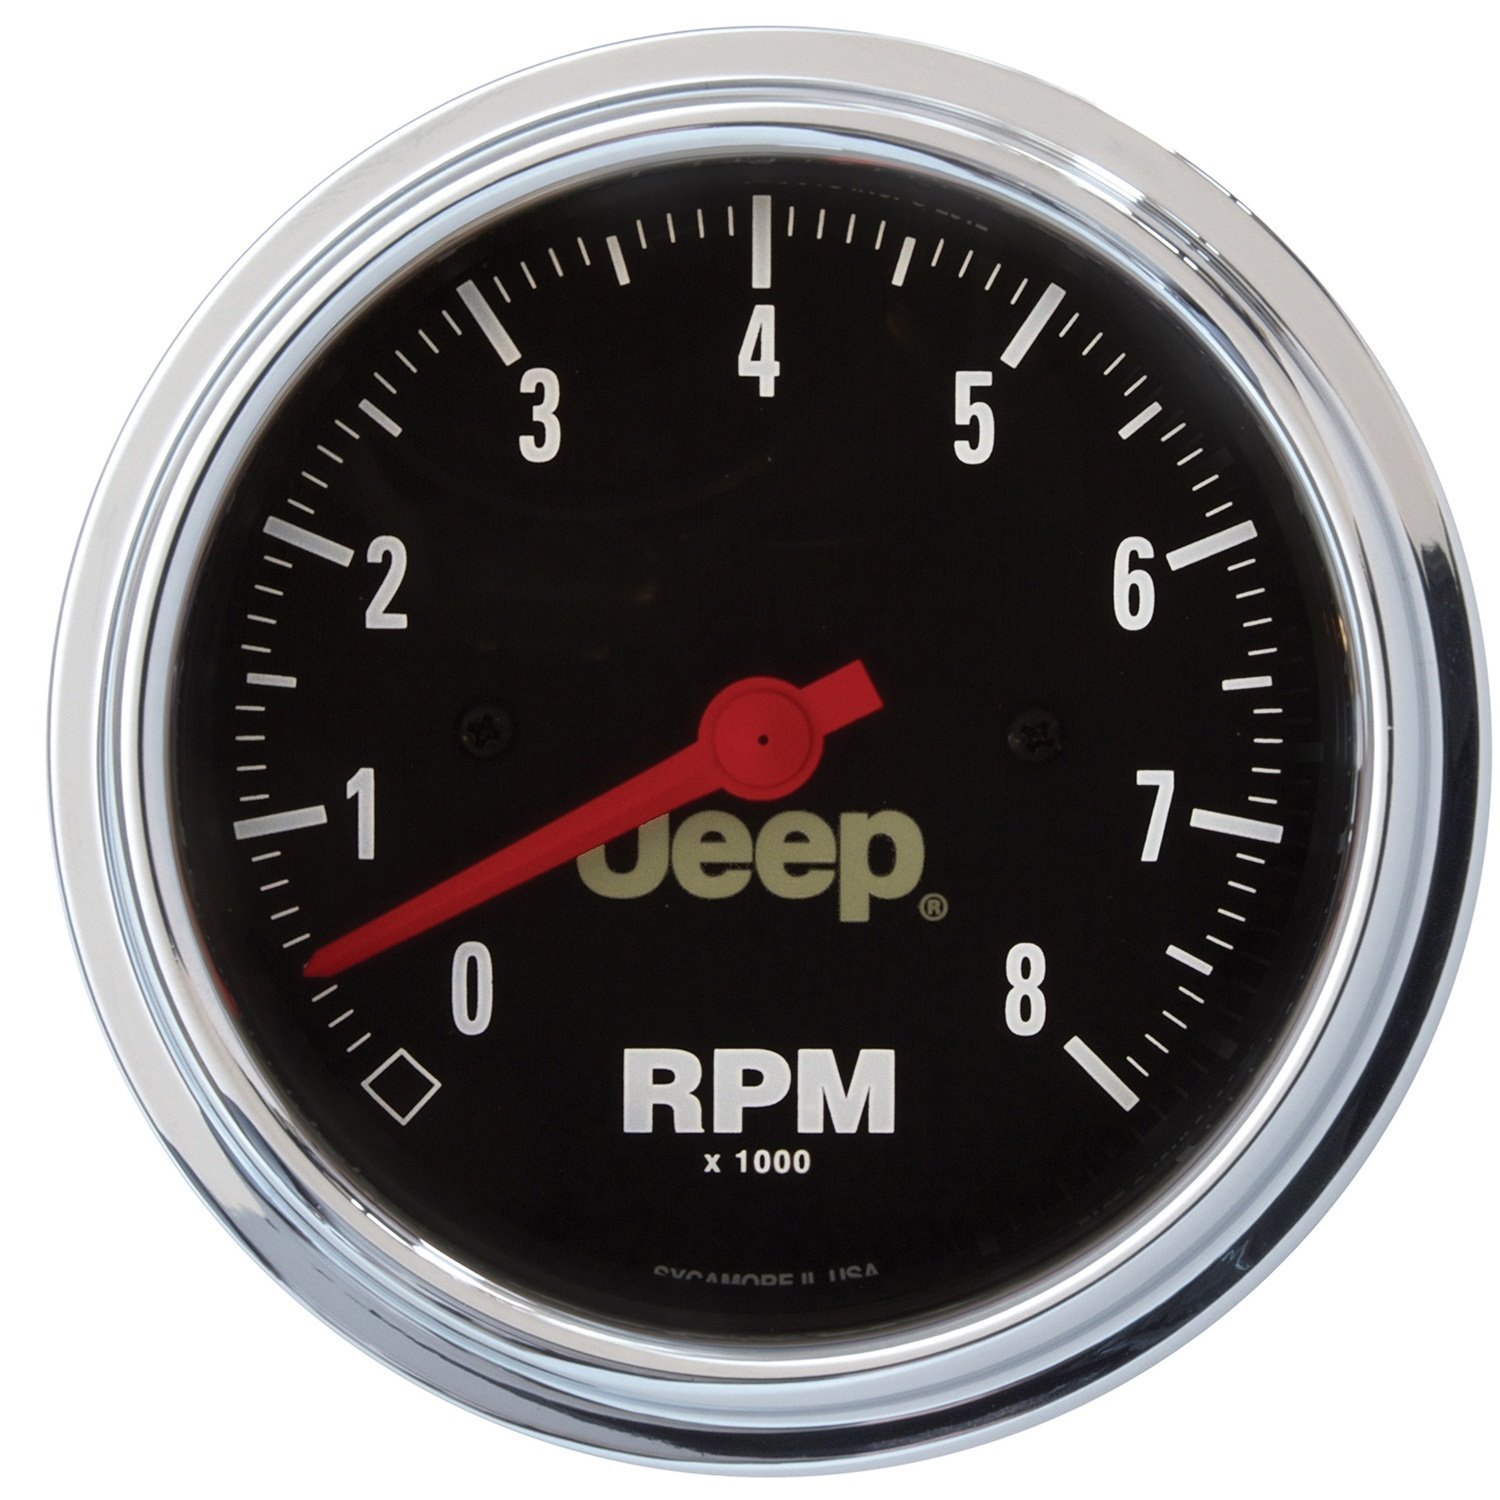 Officially Licensed Jeep Tachometer 3-3/8" Electrical